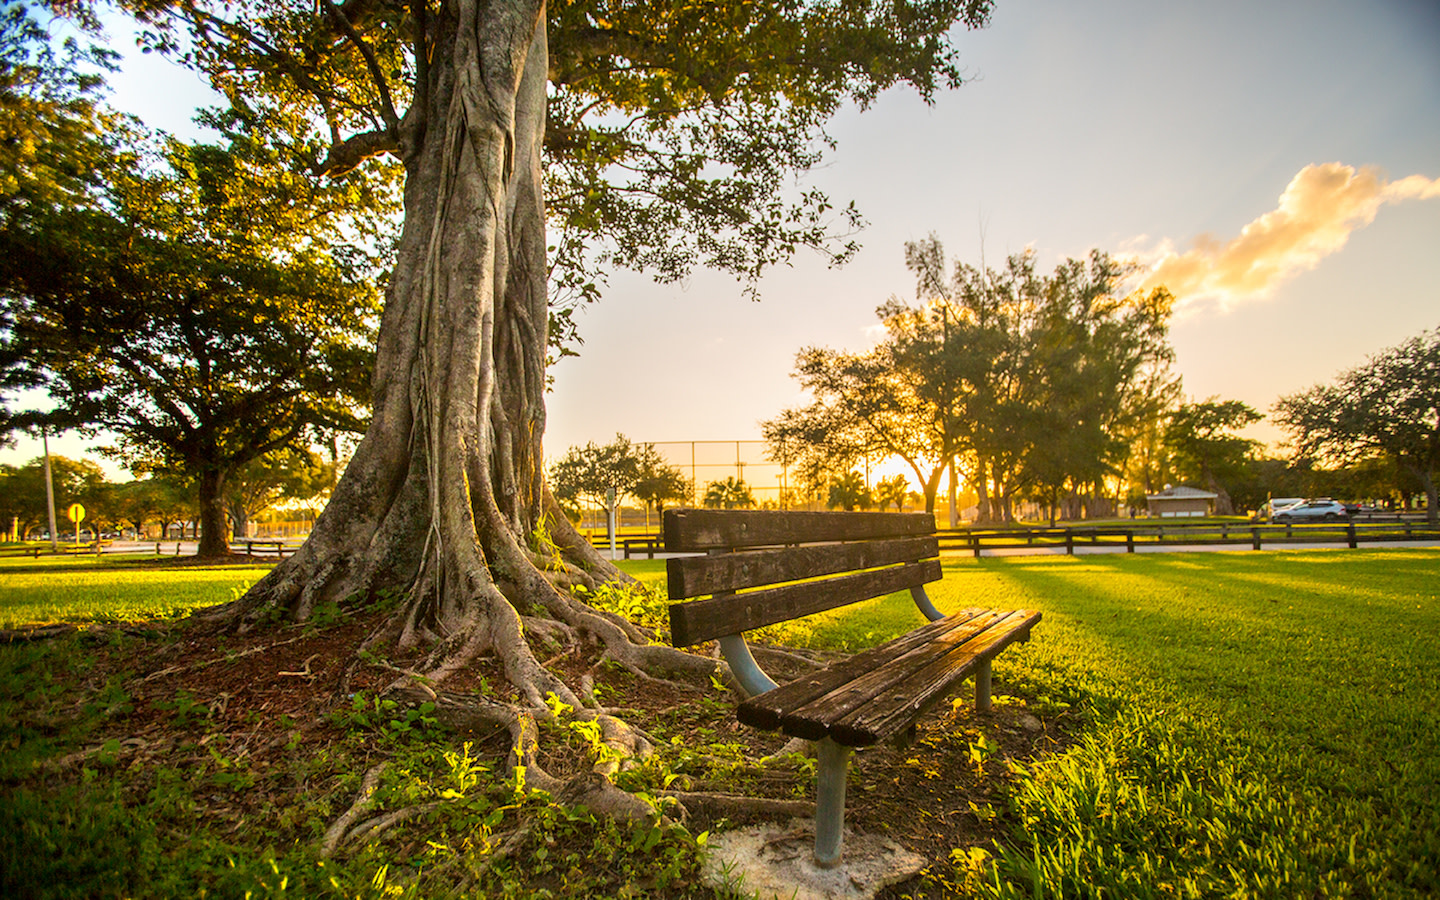 Tropical Park Bench Under Tree Sunset 12.17.20 AAFE0A40 5056 A36A 0B7CF3DBF59E06D0 aafe09375056a36 aafe0aba 5056 a36a 0bc50ef4cdd57d01